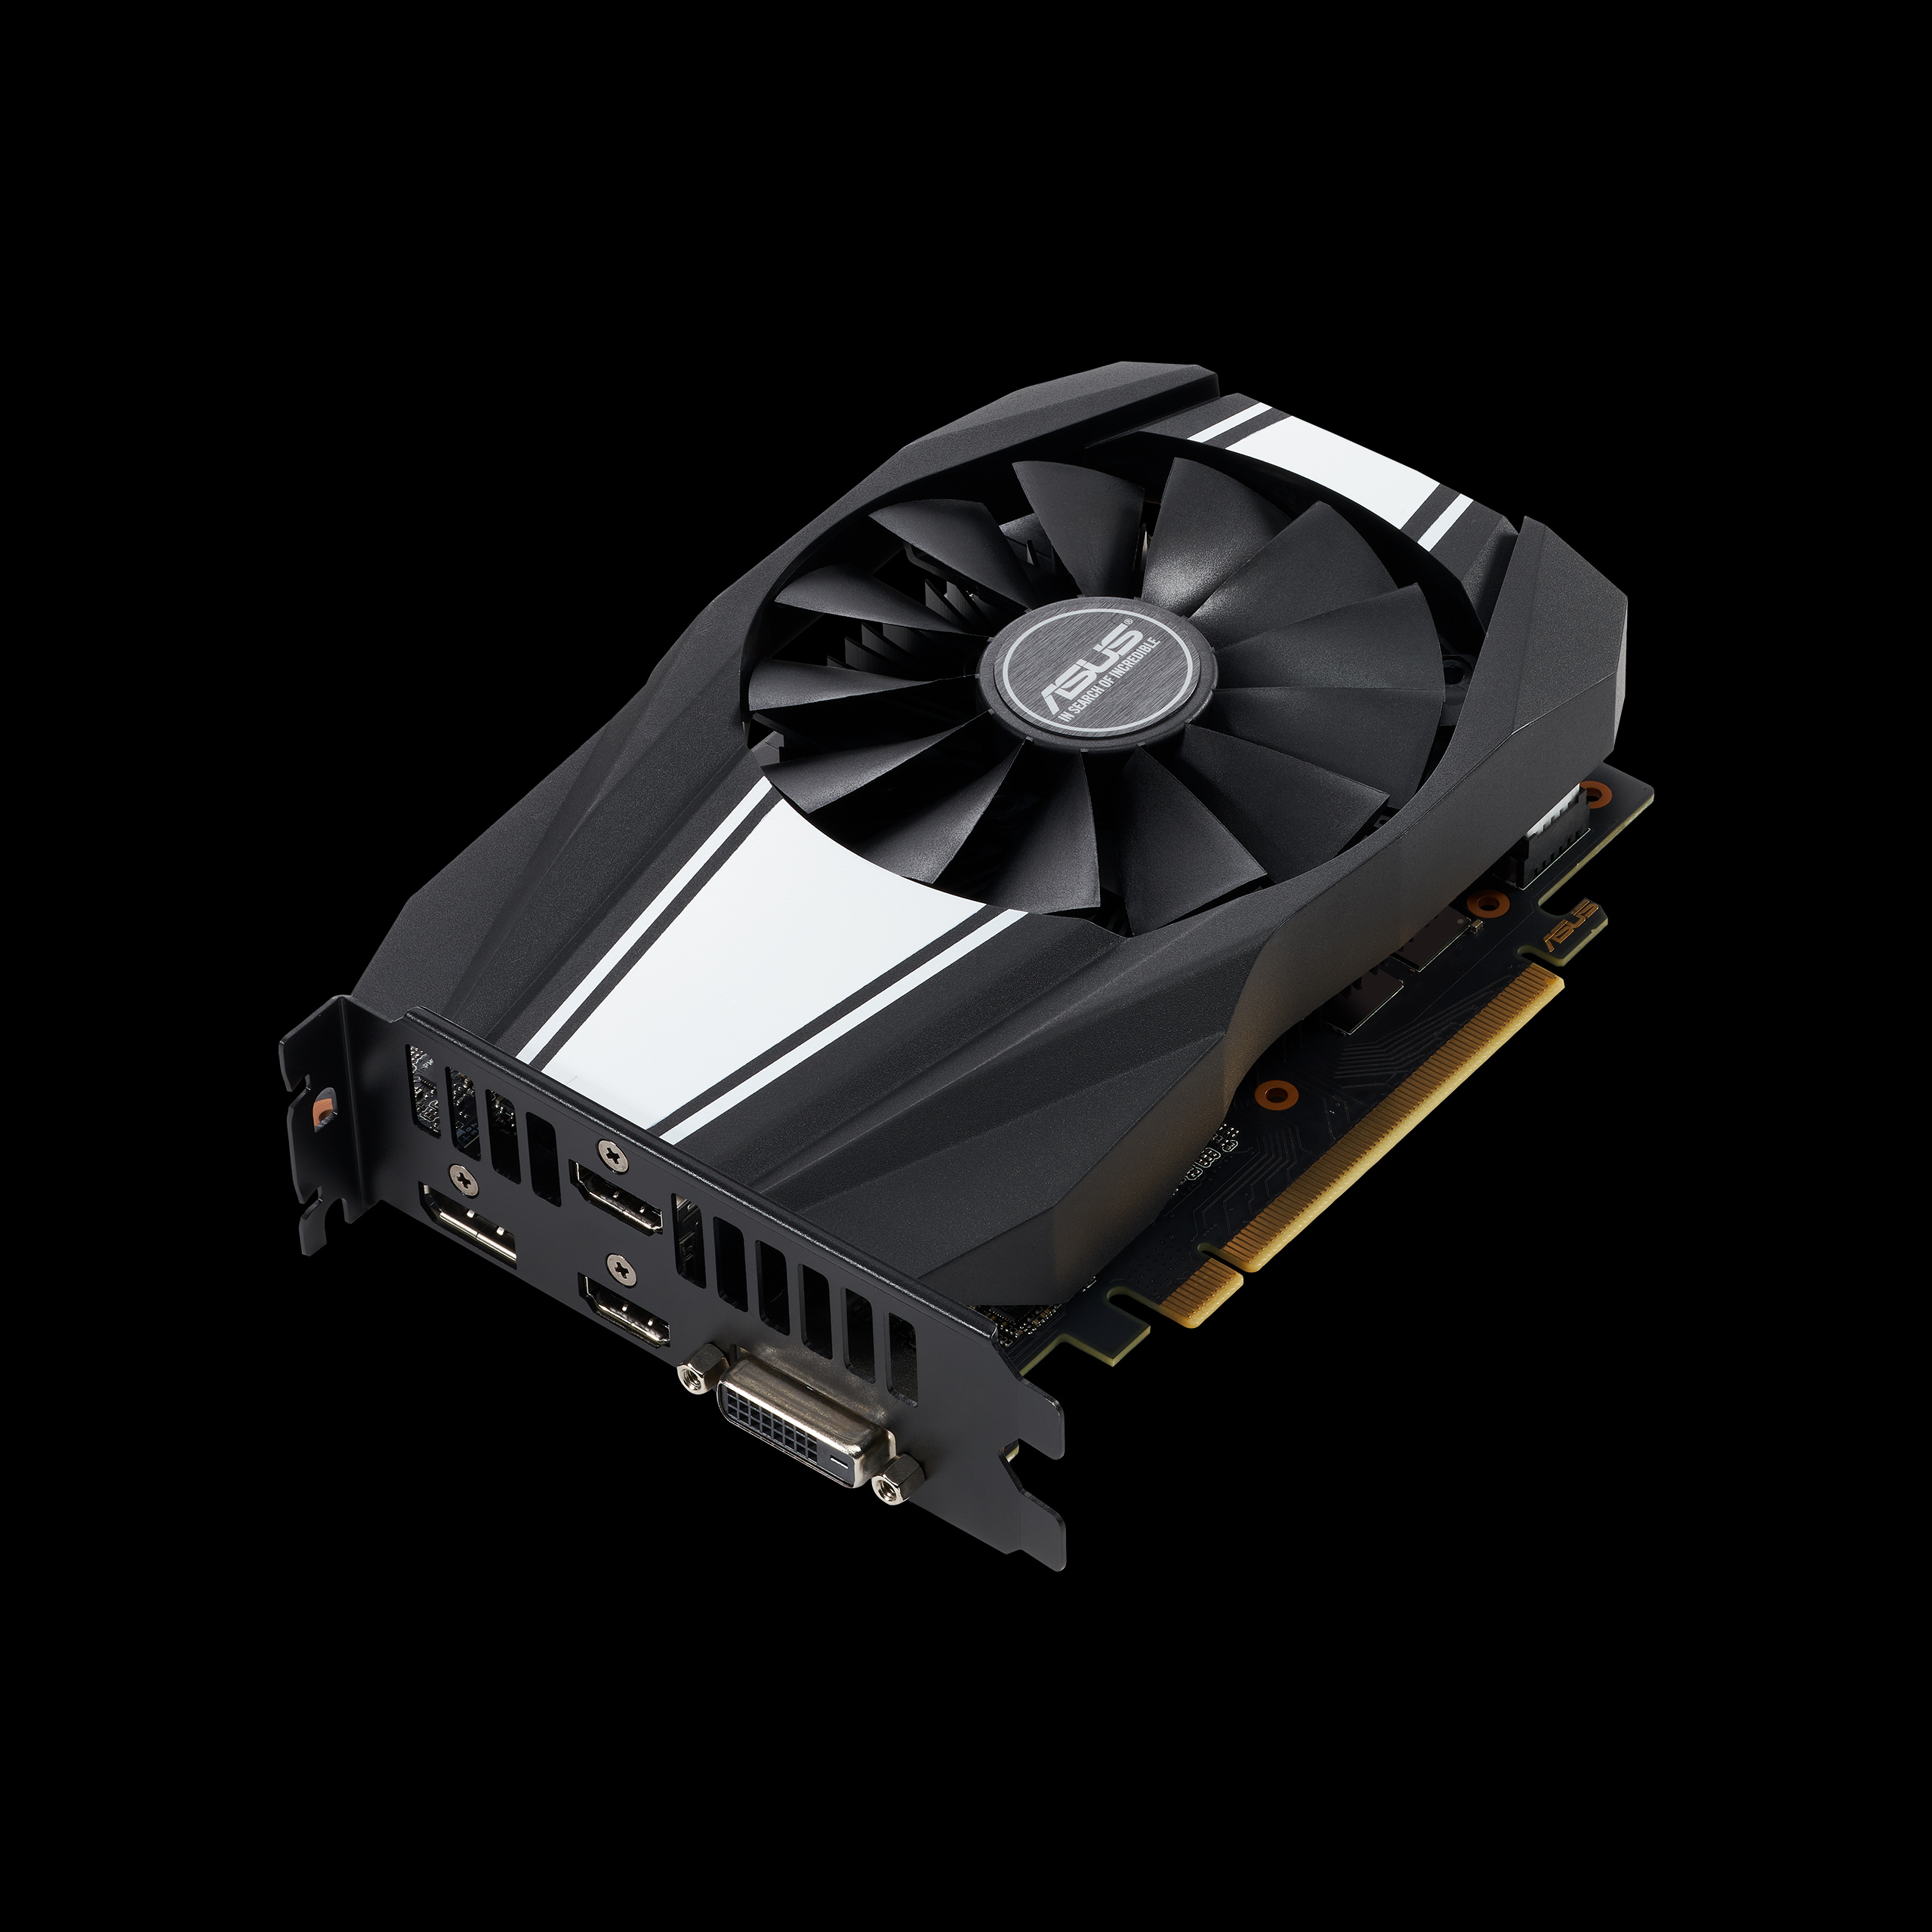 New Mid Range GeForce GTX Ti Cranks 120fps For Less | Blur Busters